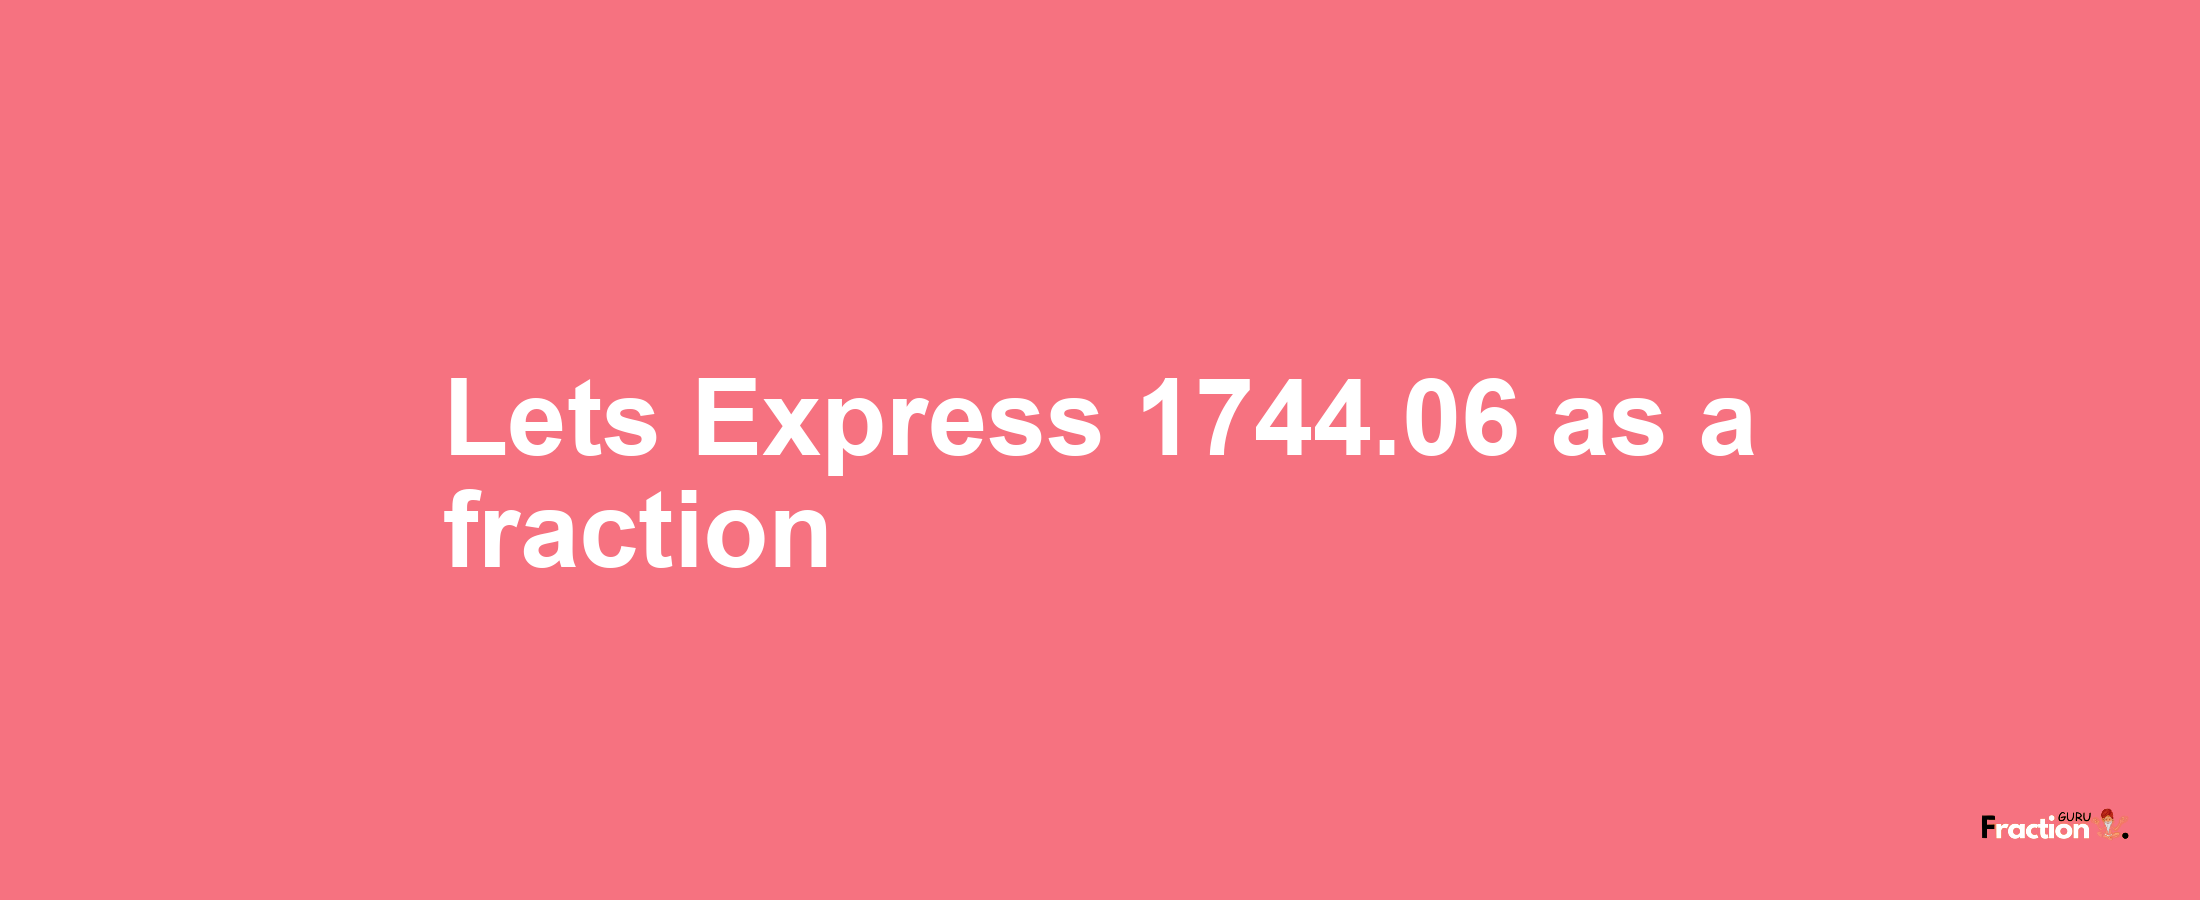 Lets Express 1744.06 as afraction